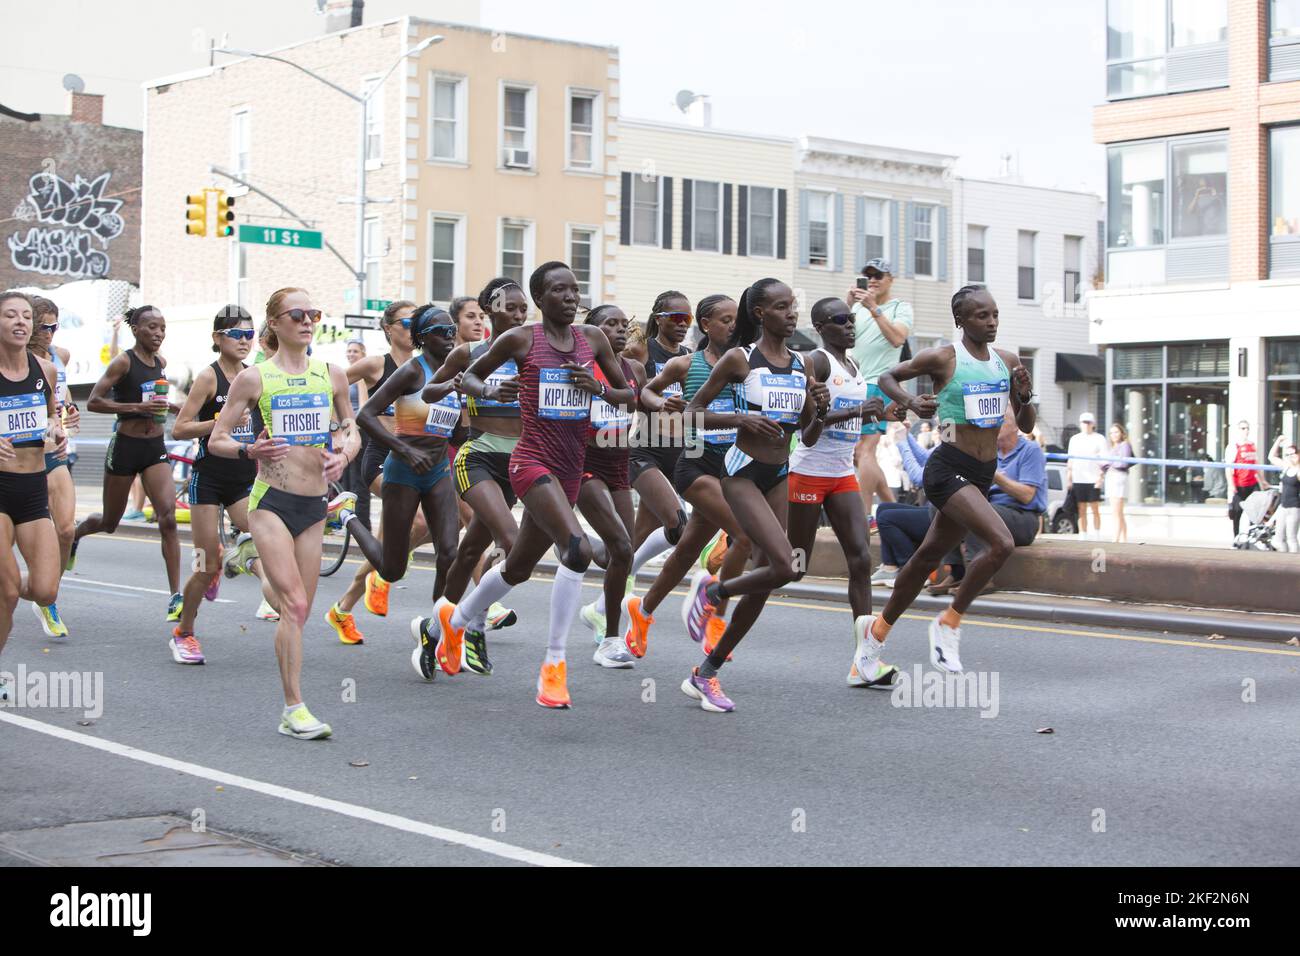 2022 TCS New York City Marathon runners cruise up 4th Avenue through Park Slope Brooklyn during the first leg of the race. Professional front runners including Sharon Lokedi of Kenya who eventually won the race. Stock Photo